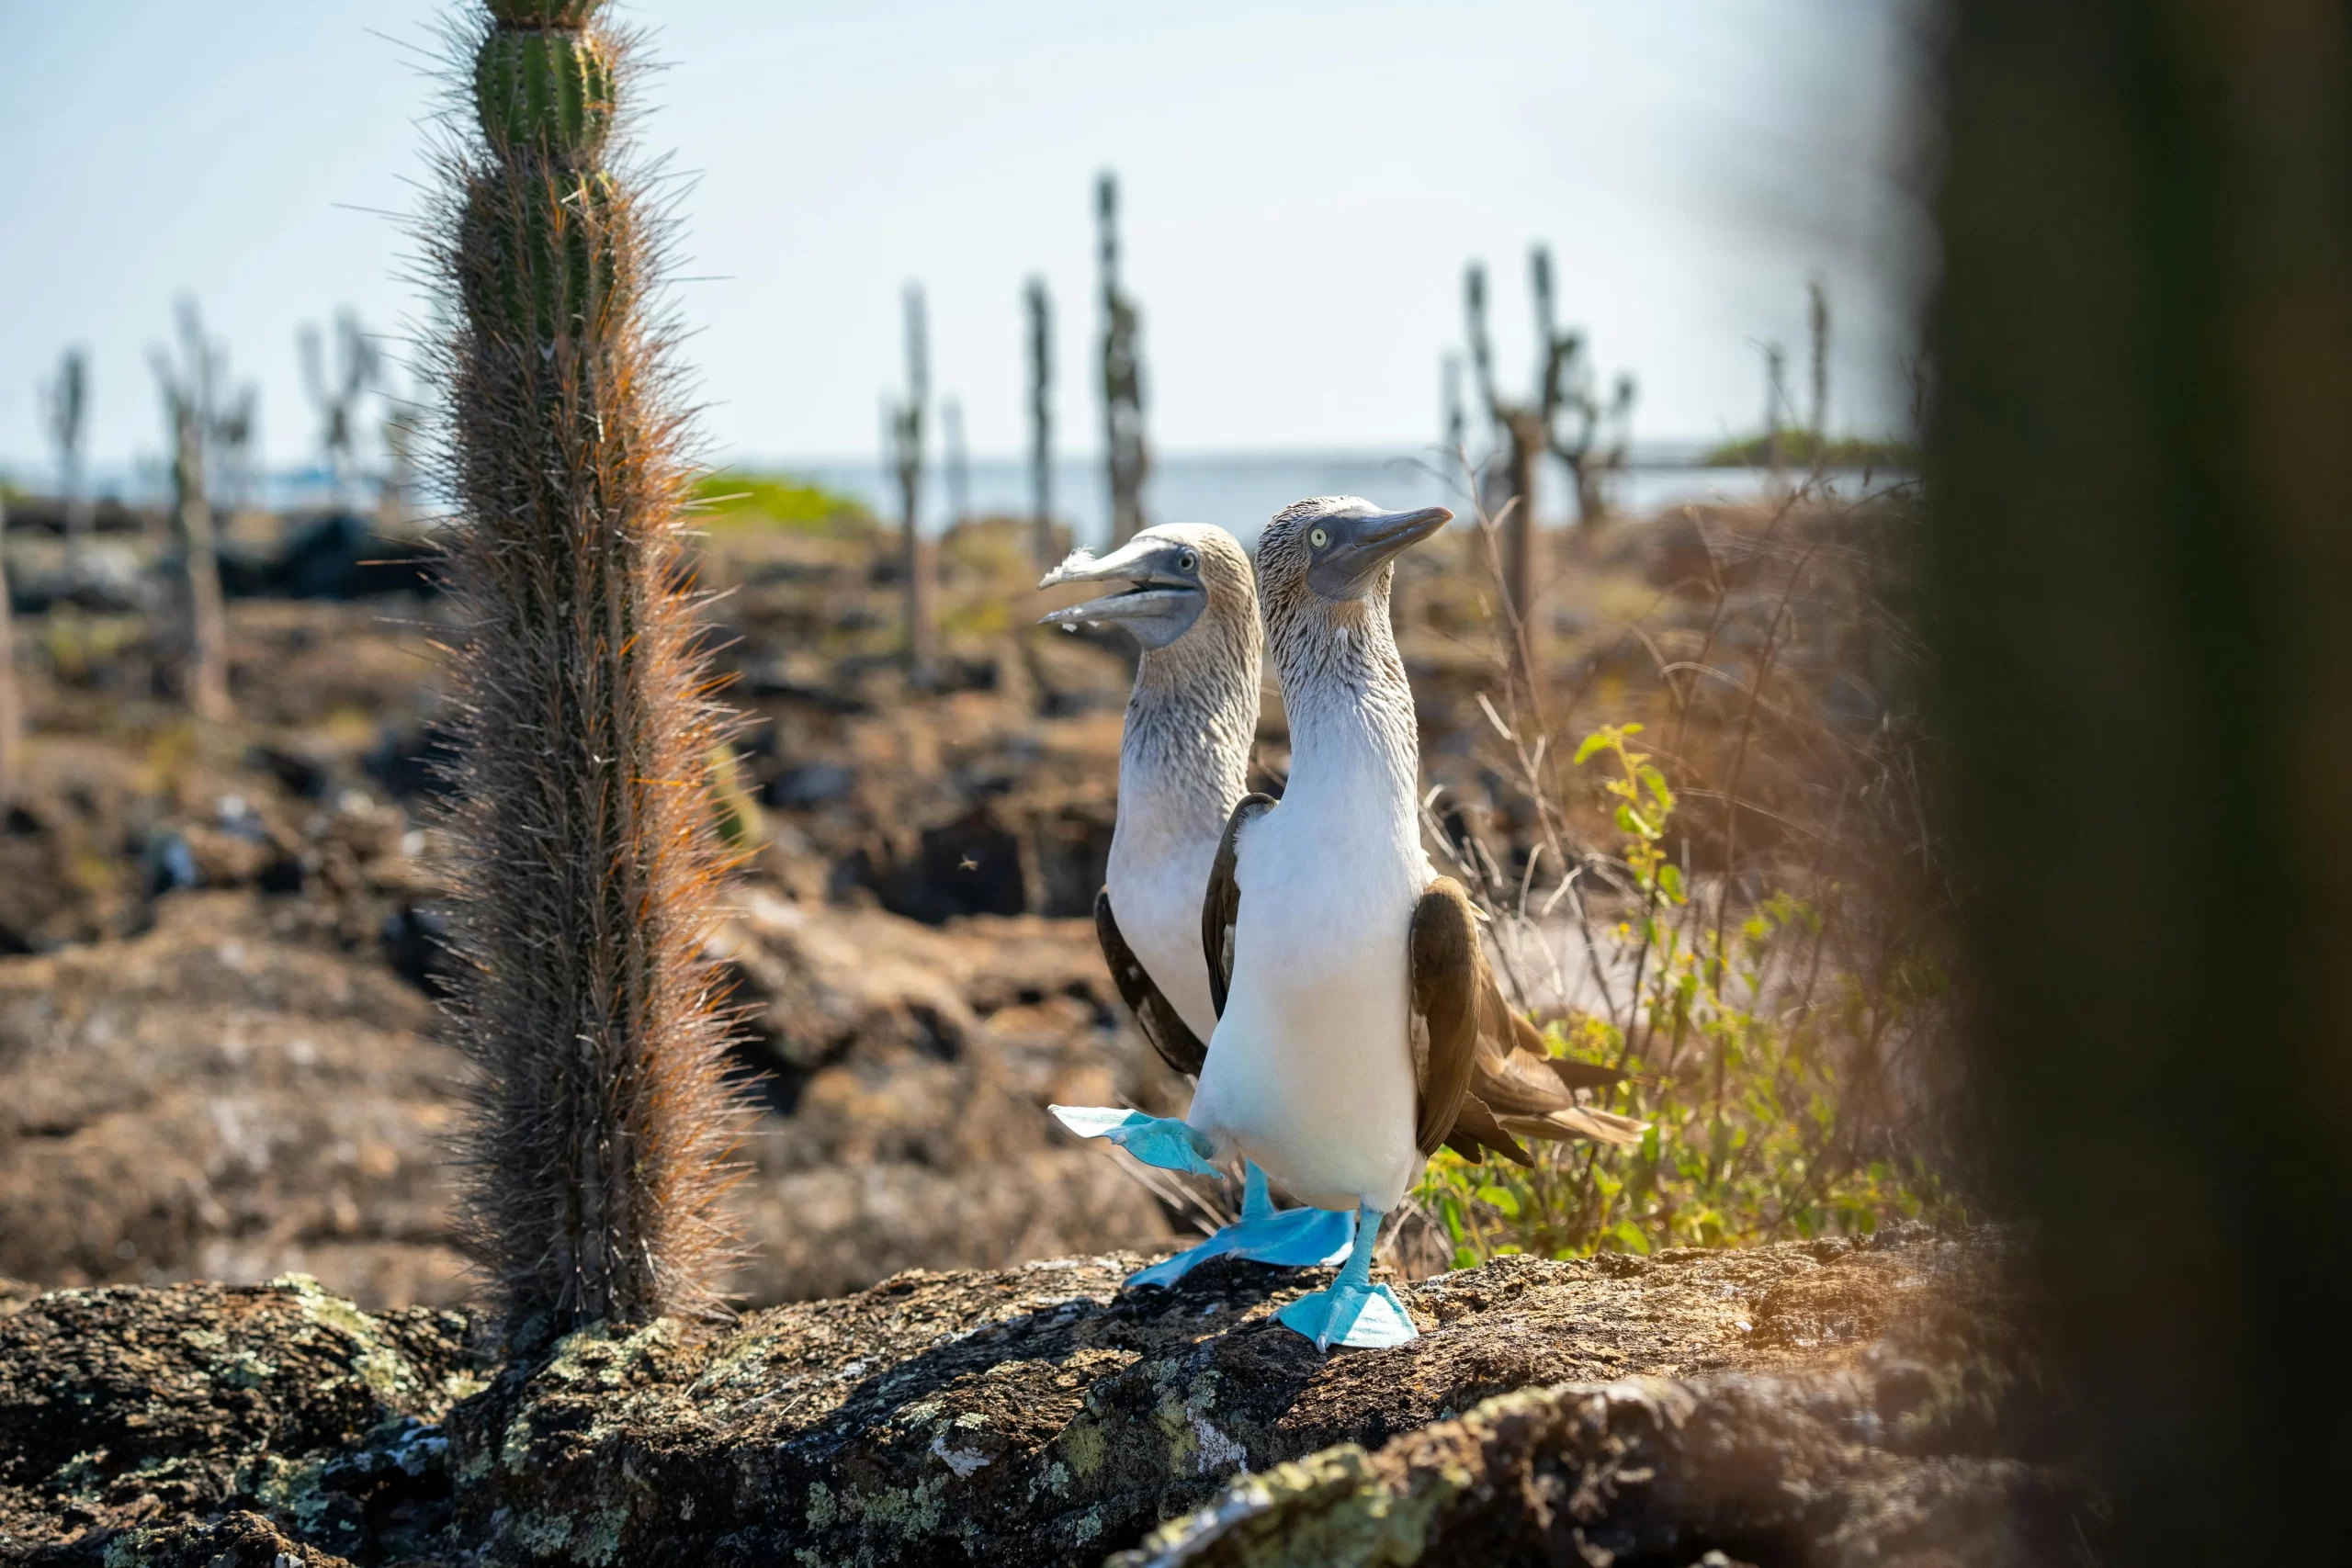 Two Blue-footed Boobies stand next to a cactus. Blue-footed Boobies have funny bird names that are recognized by many people.